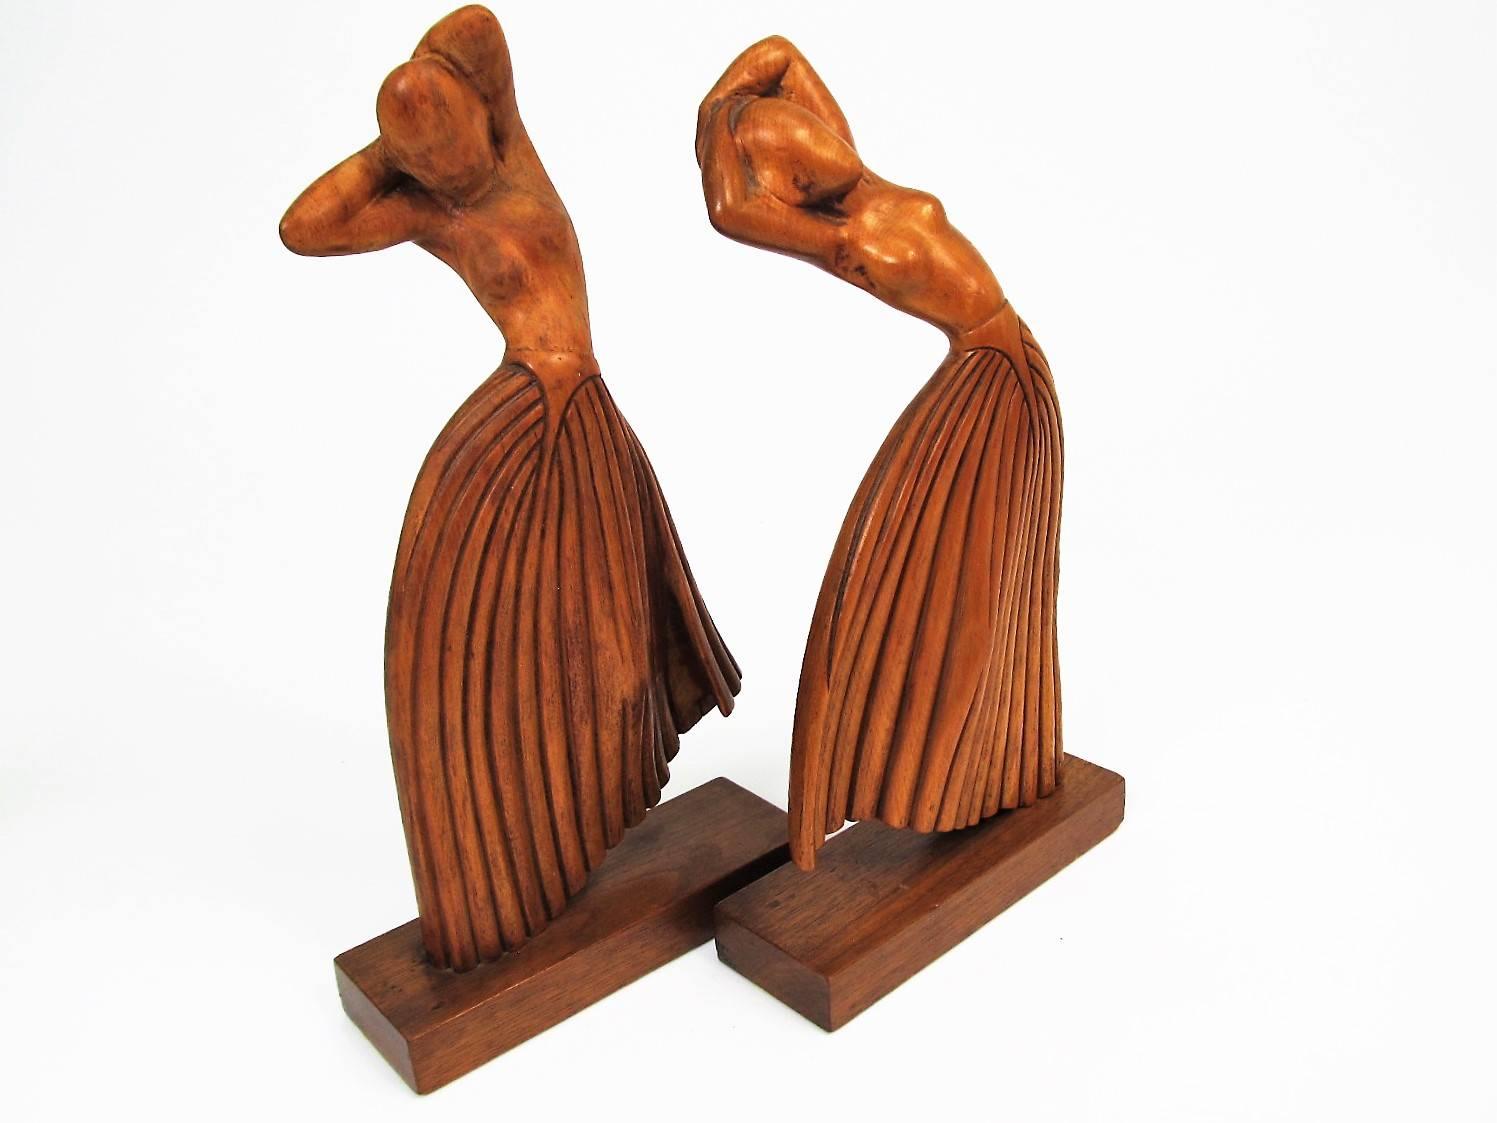 Pair of Hand-Carved Art Deco Dancing Female Figures 1